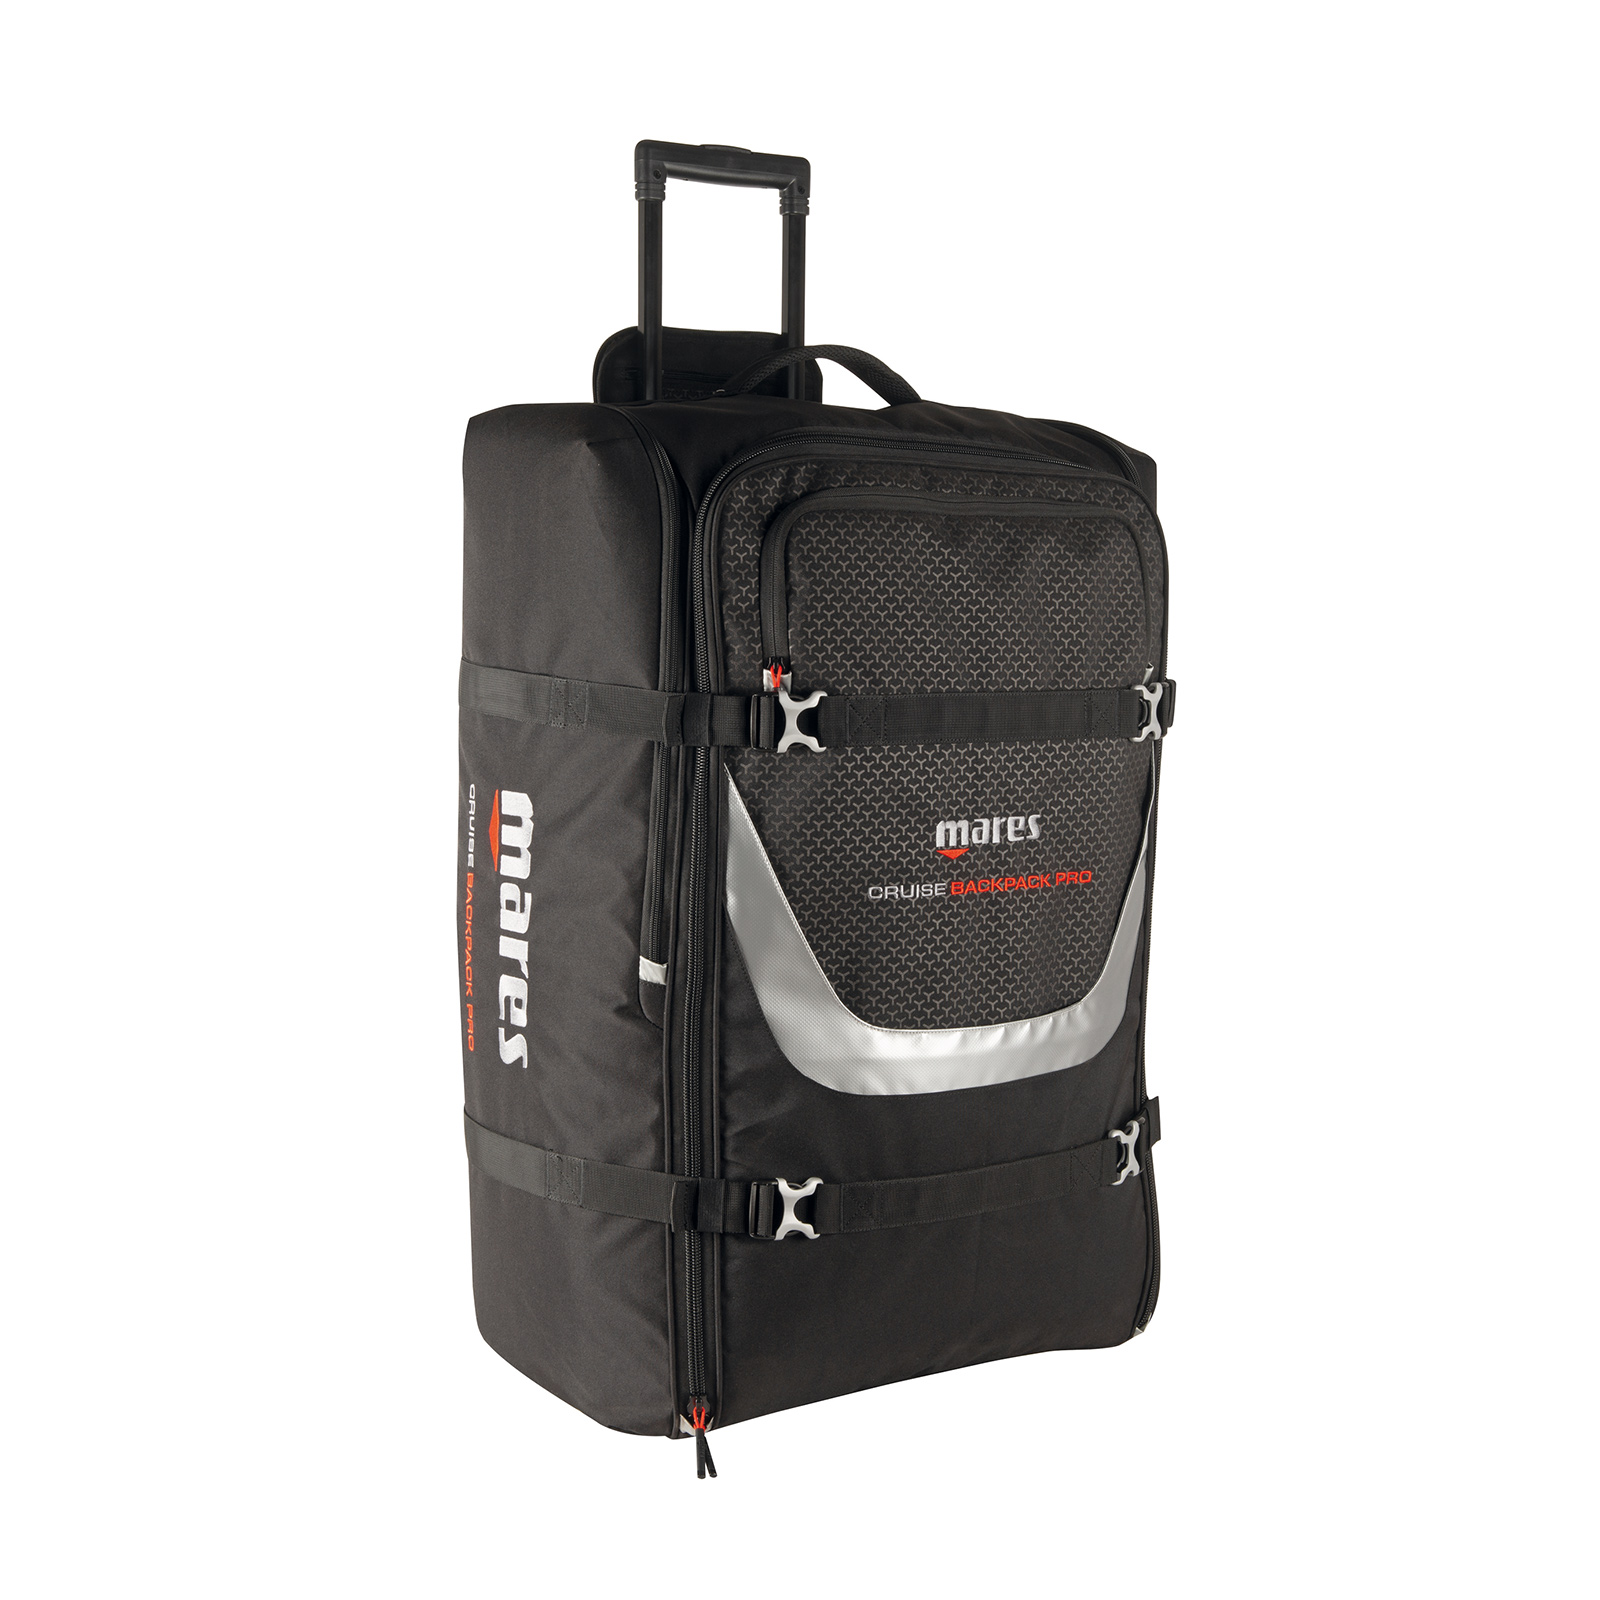 Mares Cruise Backpack Pro Bag